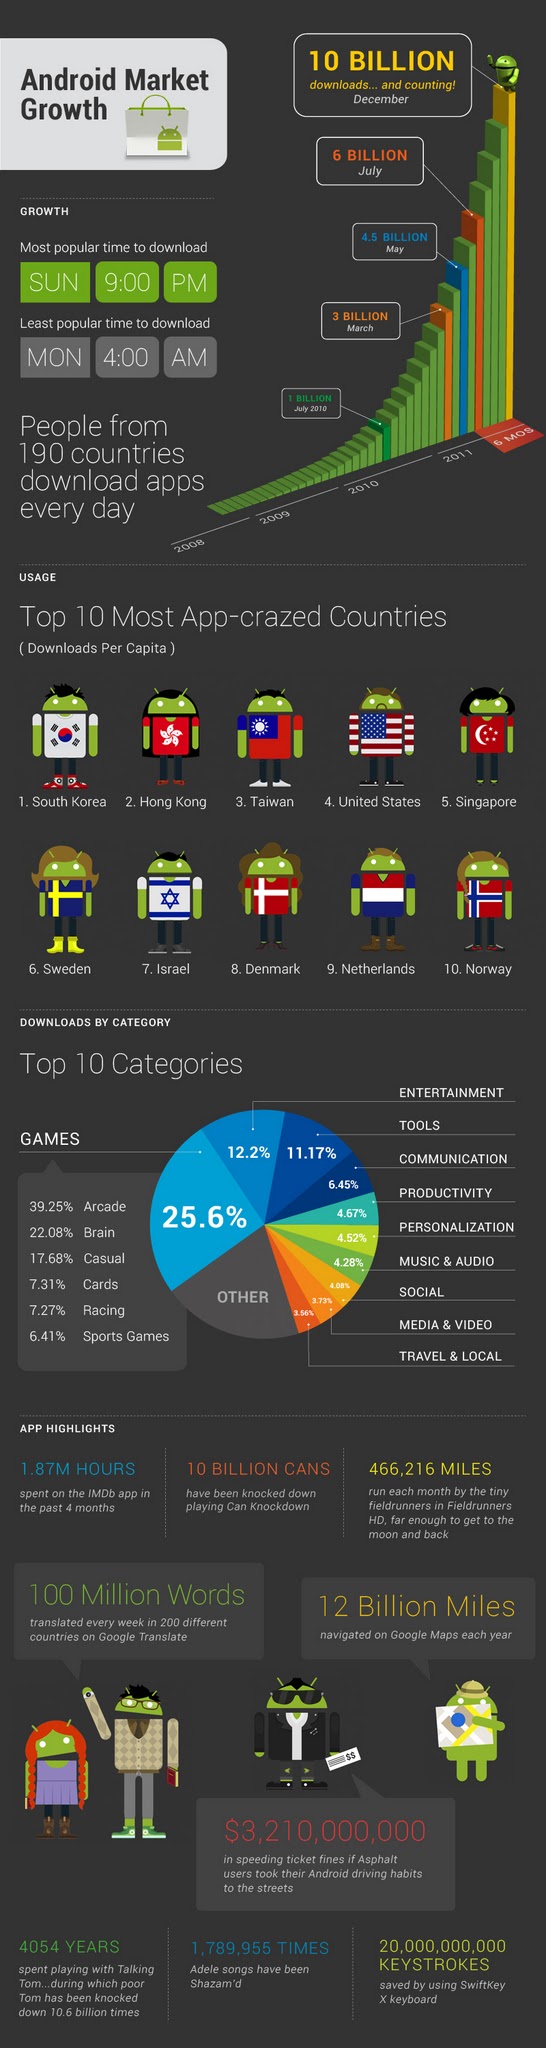 FINAL-Android-Market-Infographic